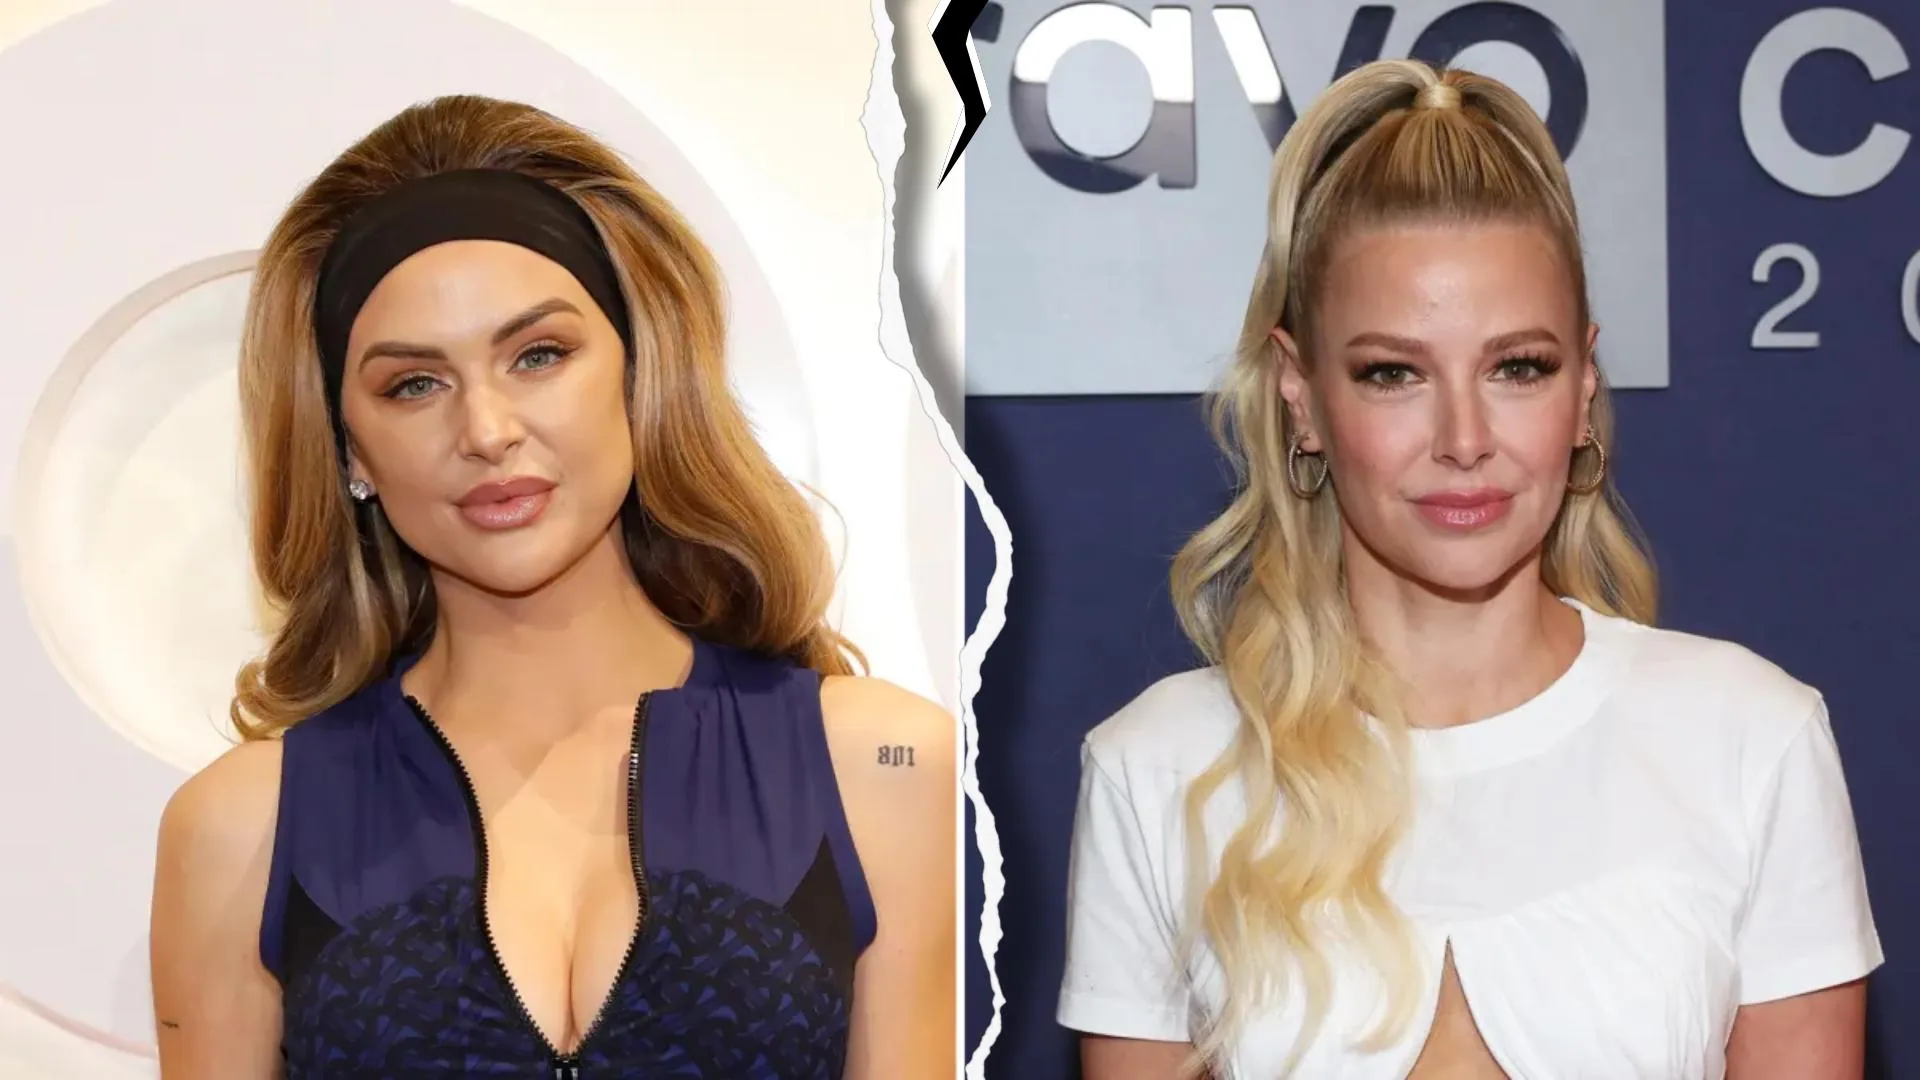 Vanderpump Rules Reunion Gets Very Intense as Lala Kent Confirms Fight with Ariana Madix